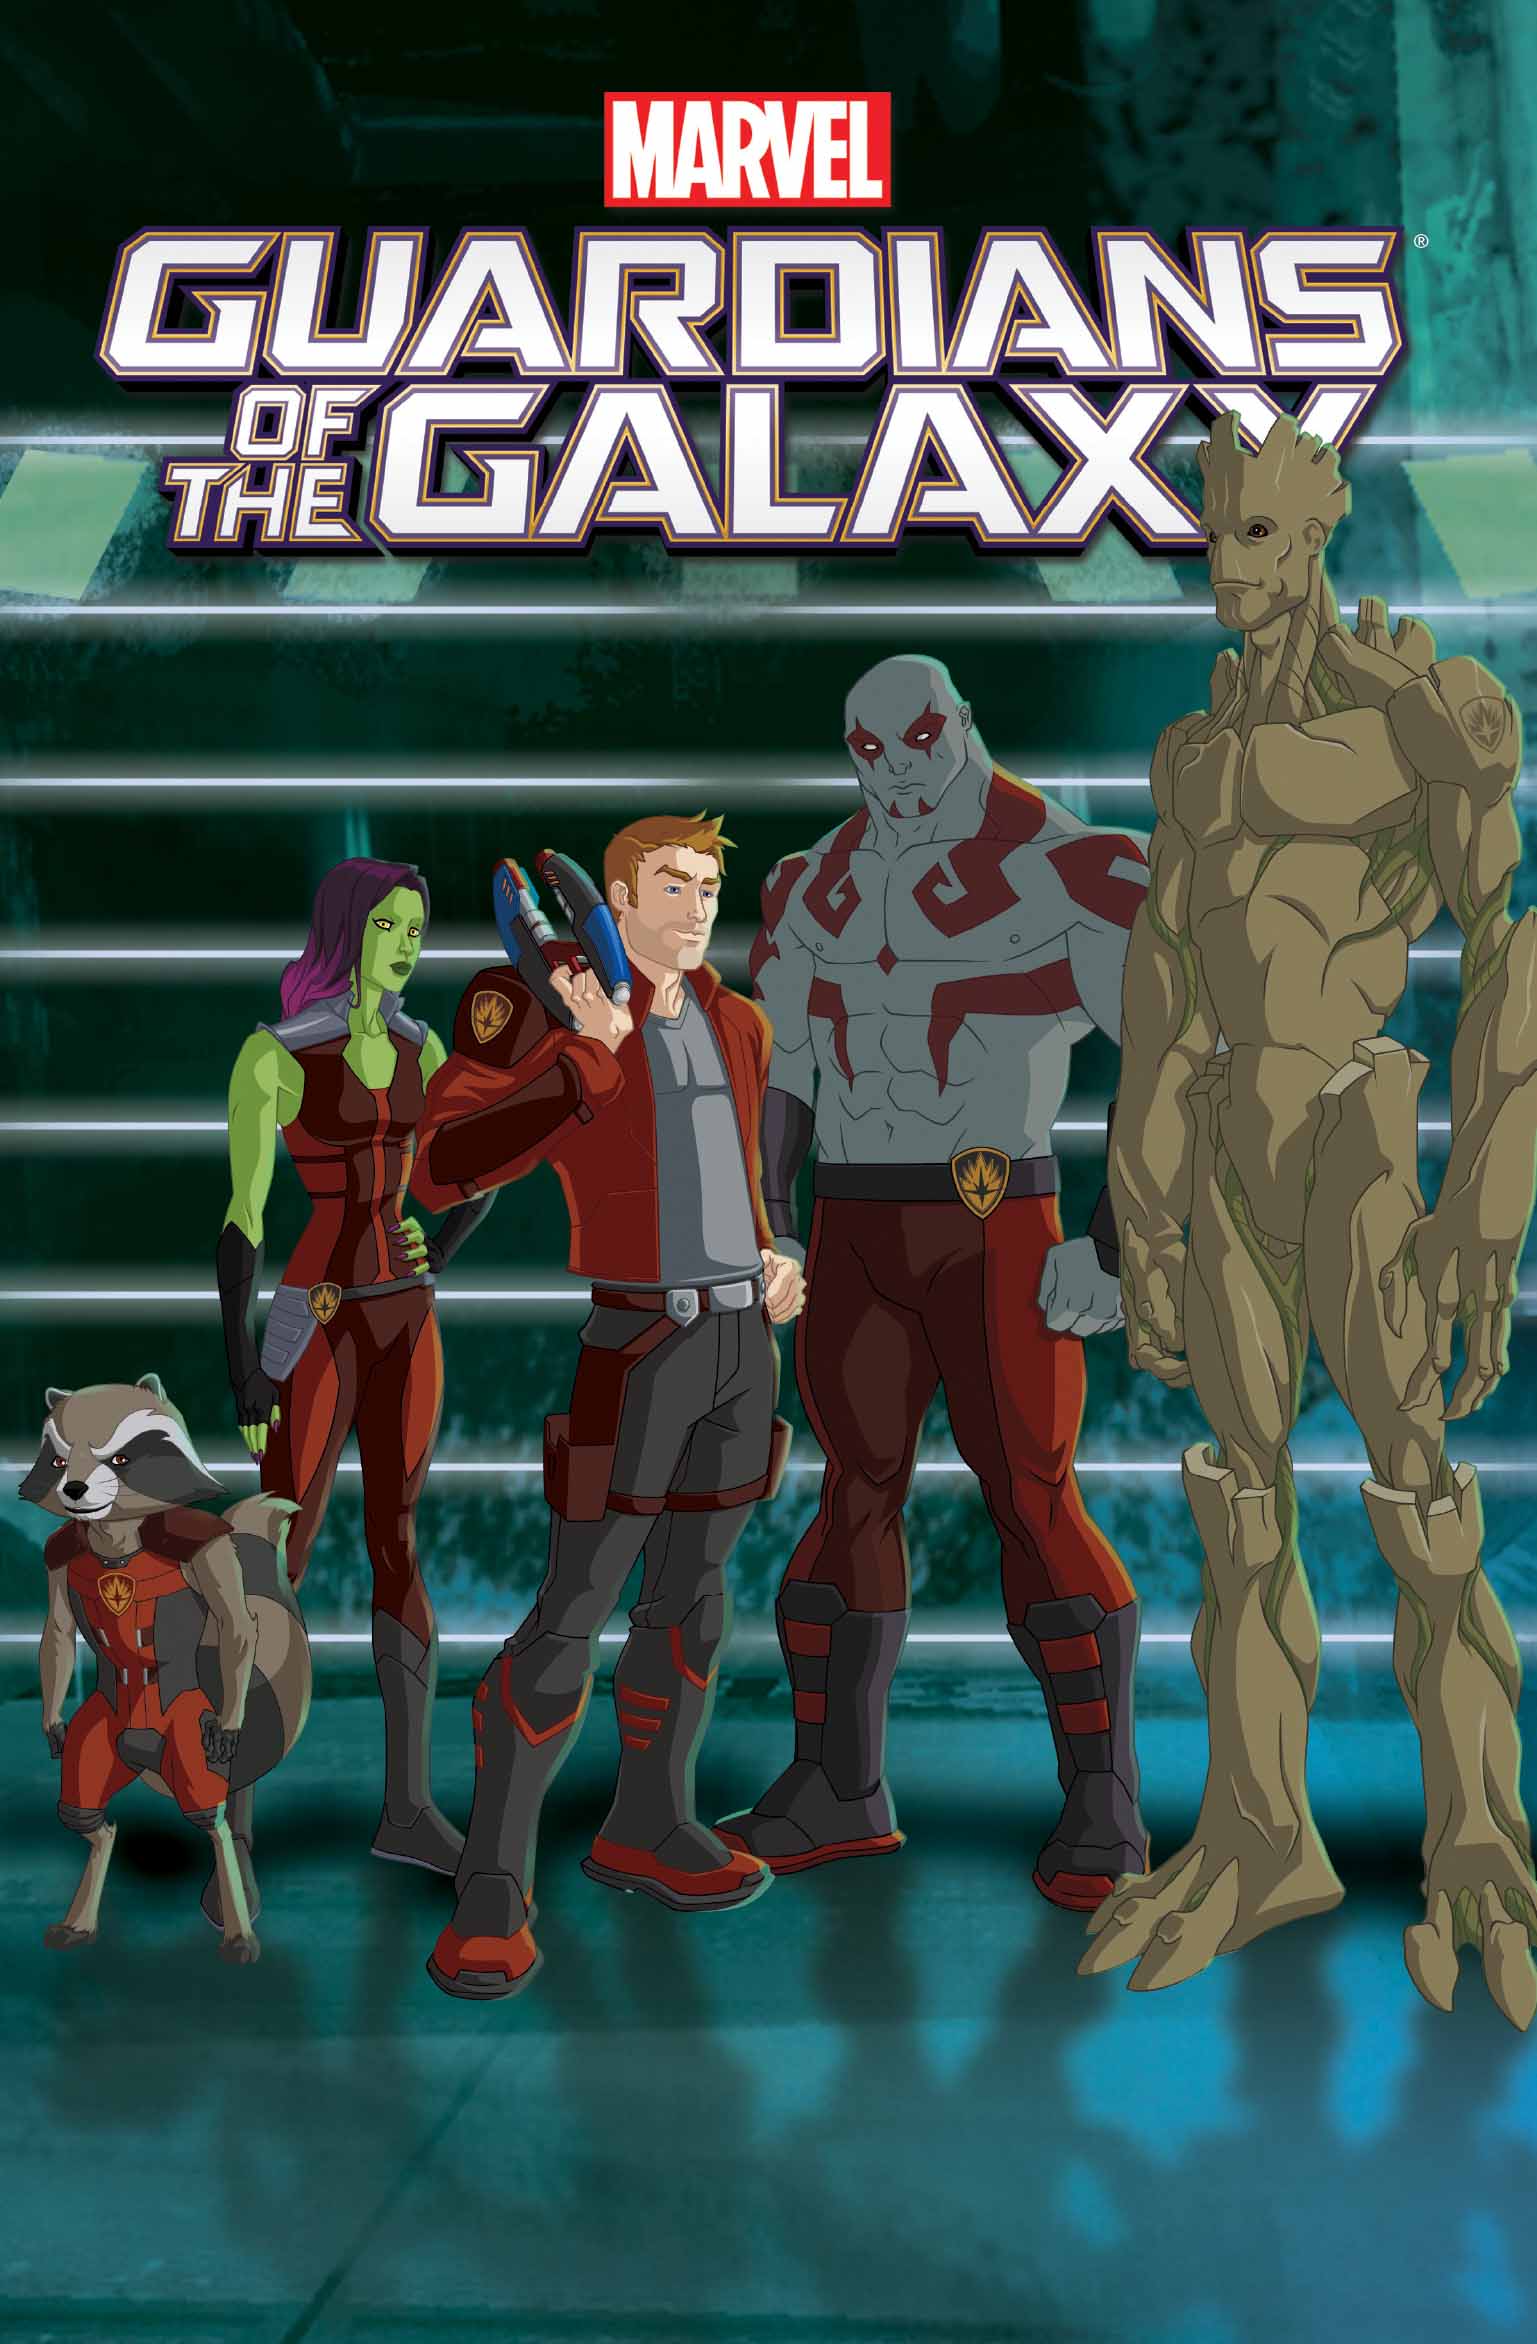 MARVEL UNIVERSE GUARDIANS OF THE GALAXY VOL. 2 (Trade Paperback)